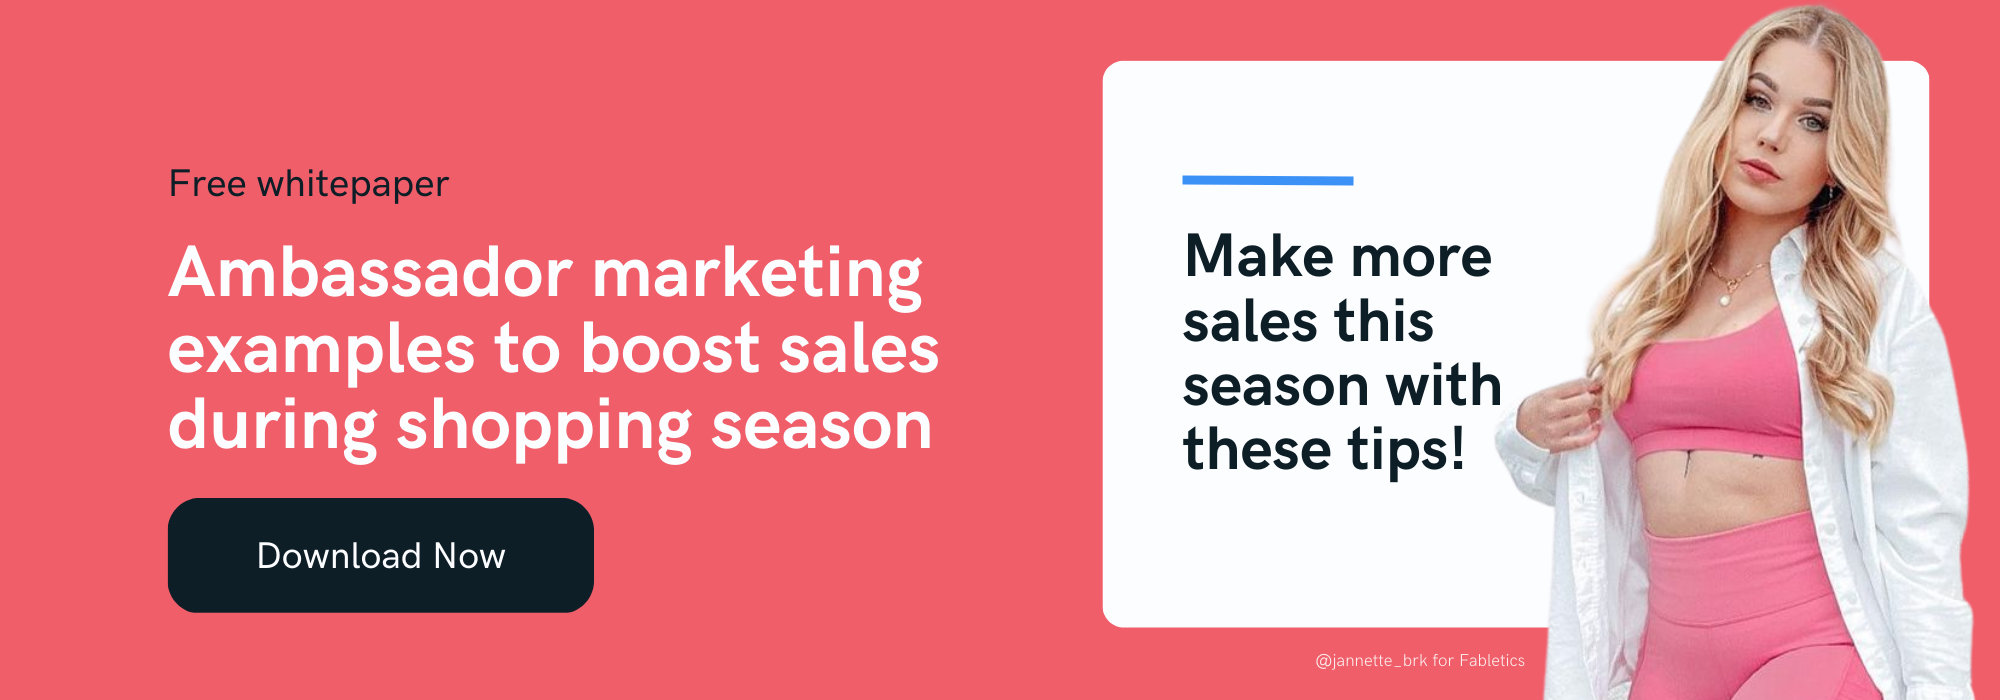 8 Must-Have Ambassador Marketing Tips & Examples to Boost Sales This Shopping Season